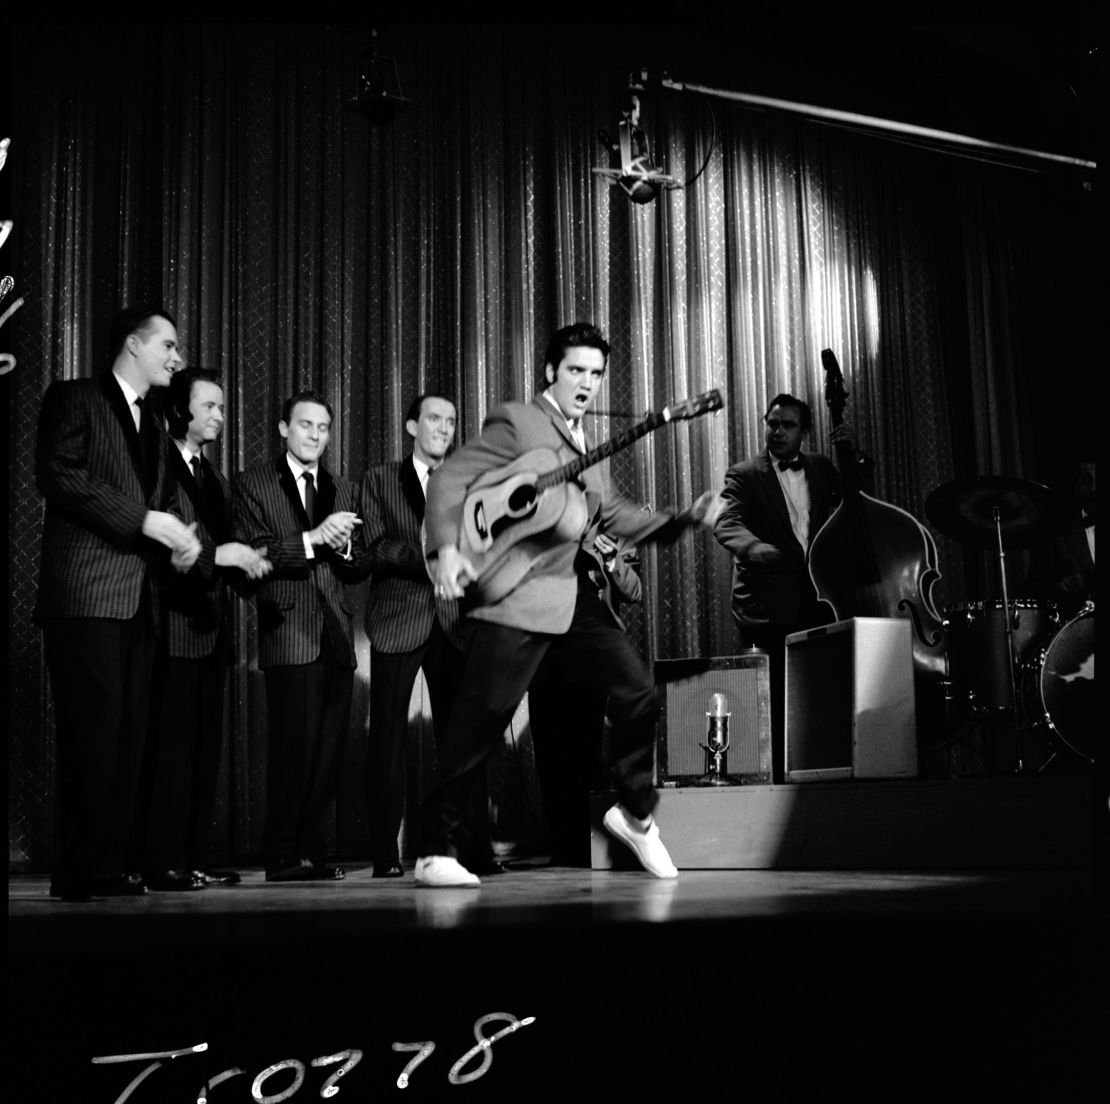 American singer and musician Elvis Presley swivels his hips as he performs with his band onstage during his second appearance on "The Ed Sullivan Show," on October 28, 1956. 